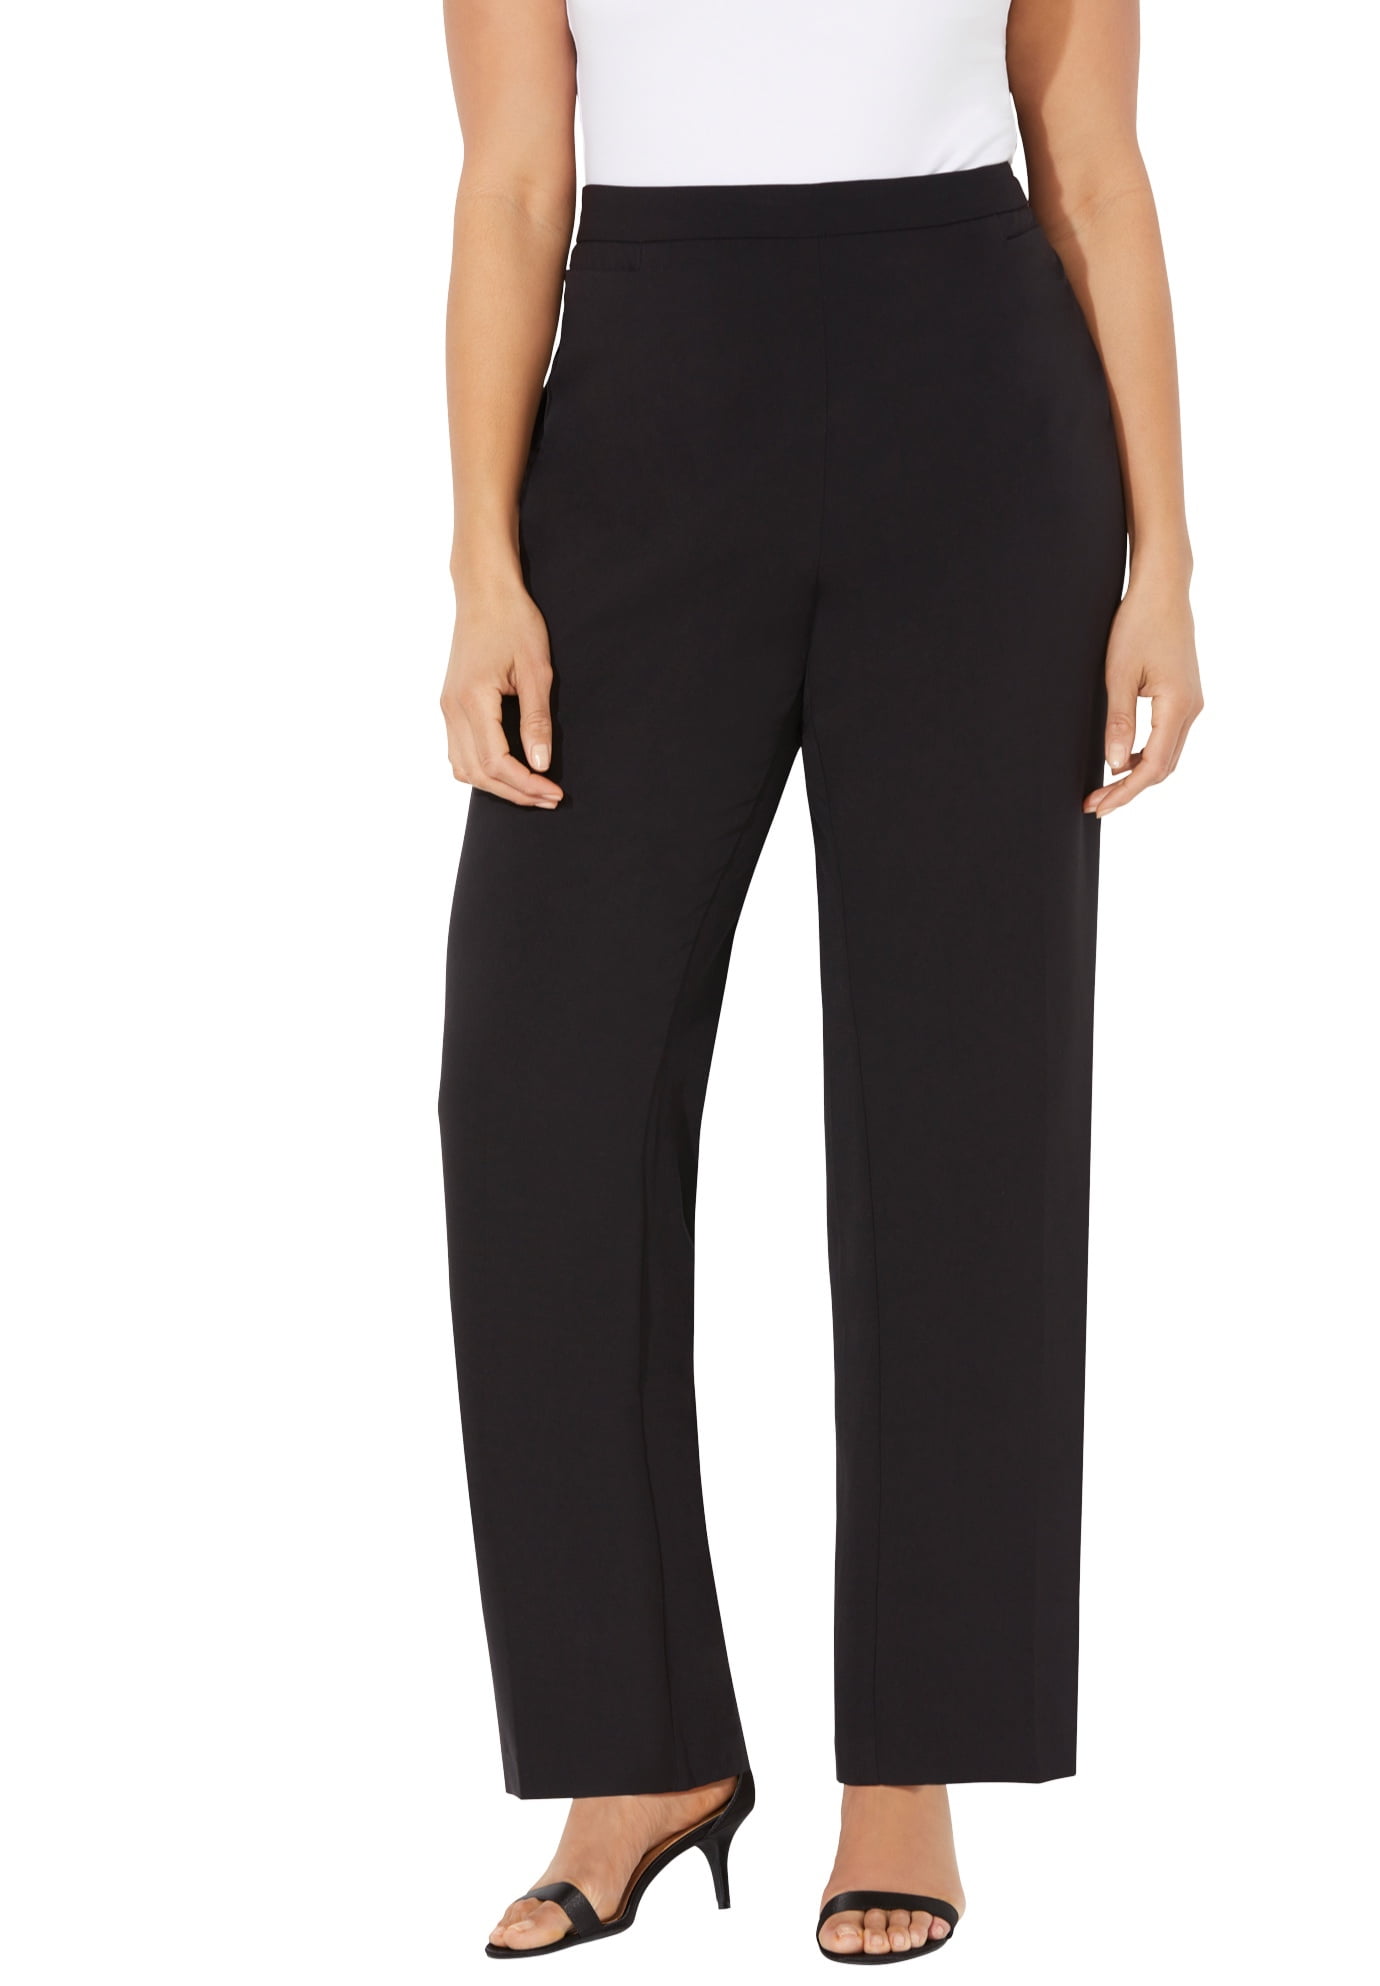 Women's Classic Career Suiting Pant Available in Regular and